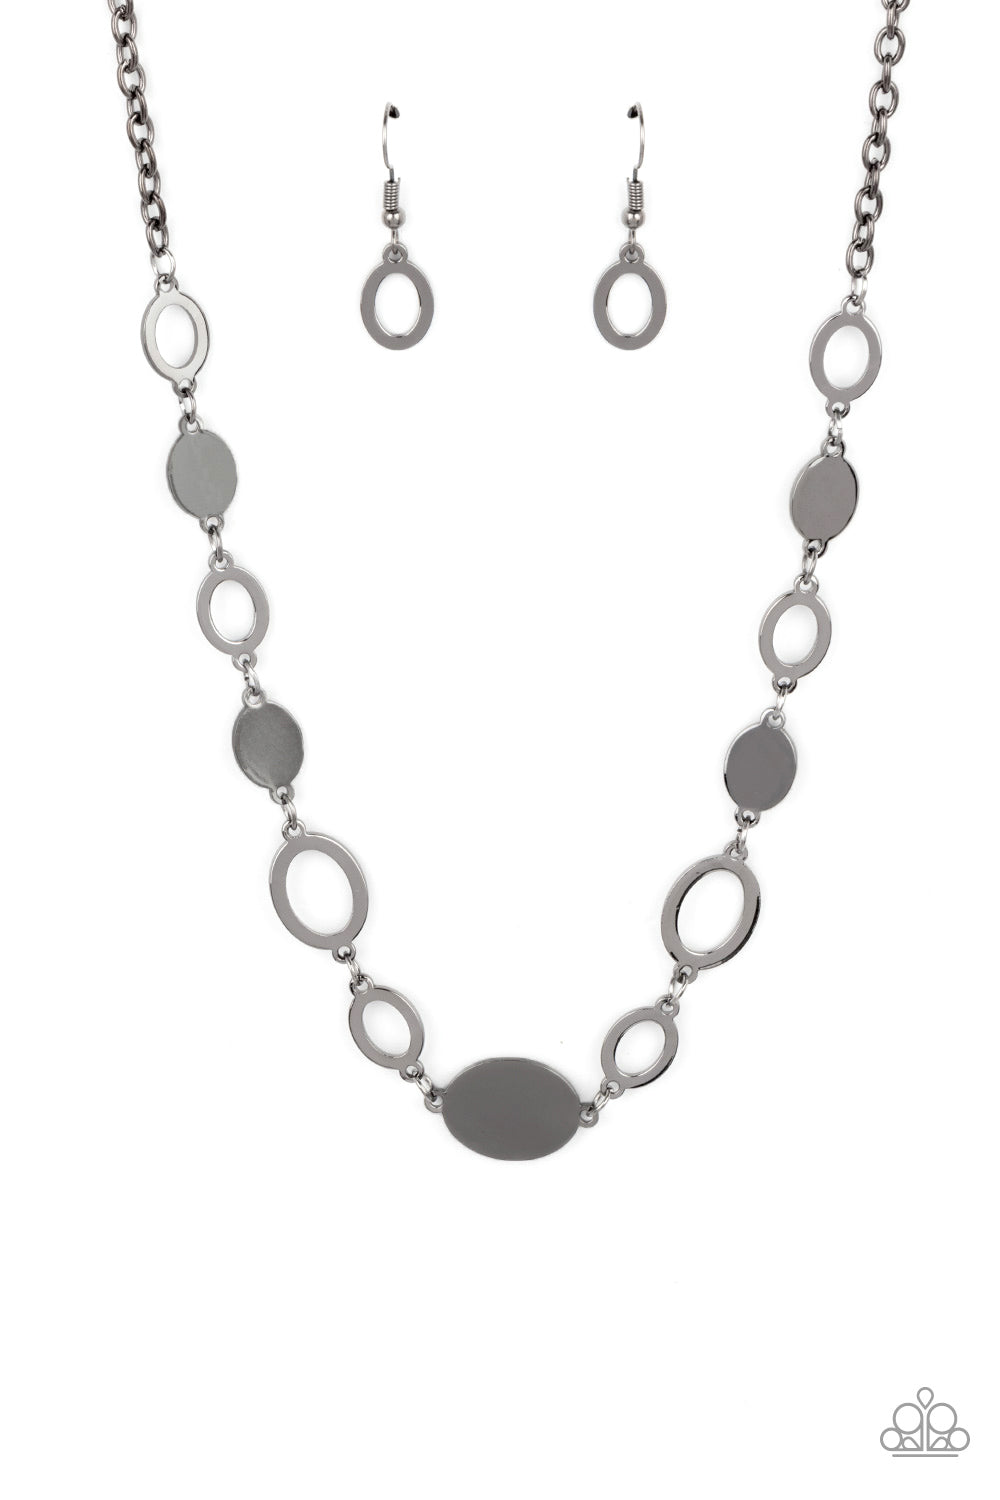 WORKING OVAL TIME BLACK-NECKLACE